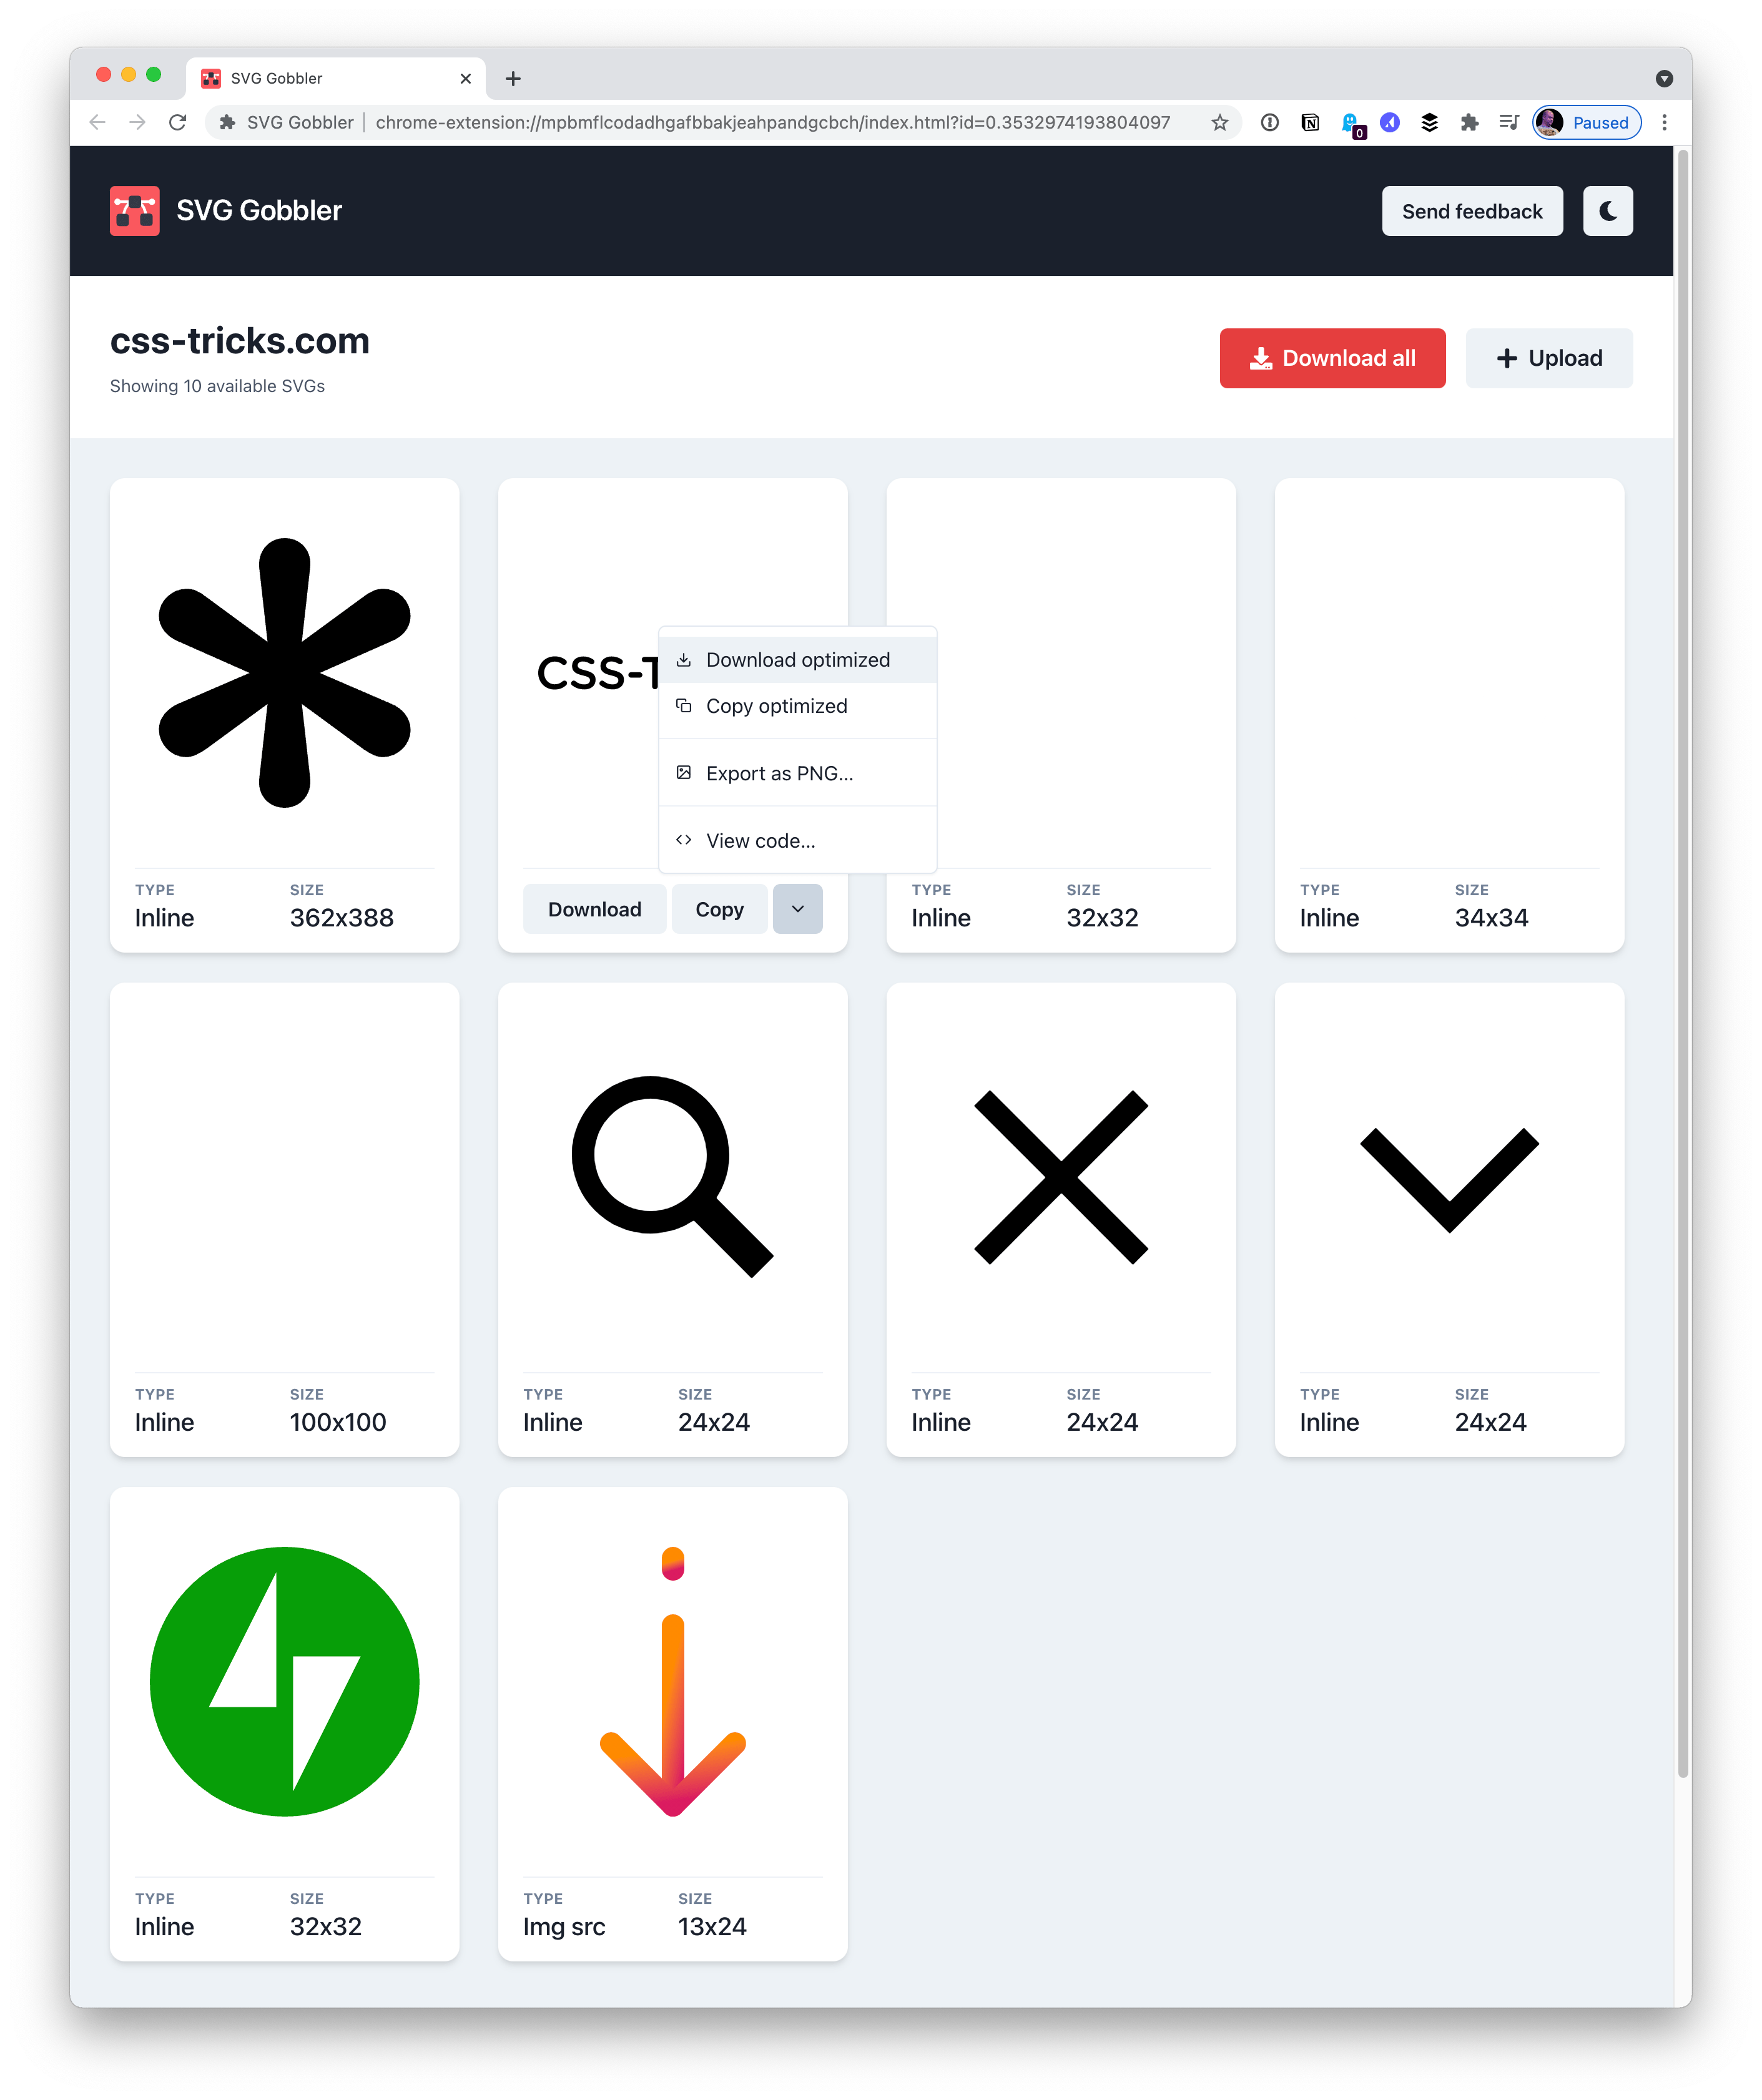 A browser window open with a black header that has the red SVG Gobbler logo flashed left and white buttons to send feedback and toggle dark mode flashed right. Below that is a grid of SVG icons, including the CSS-Tricks logo, a magnifying glass, a close icon, a downward chevron, the Jetpack logo, and an orange downward arrow.